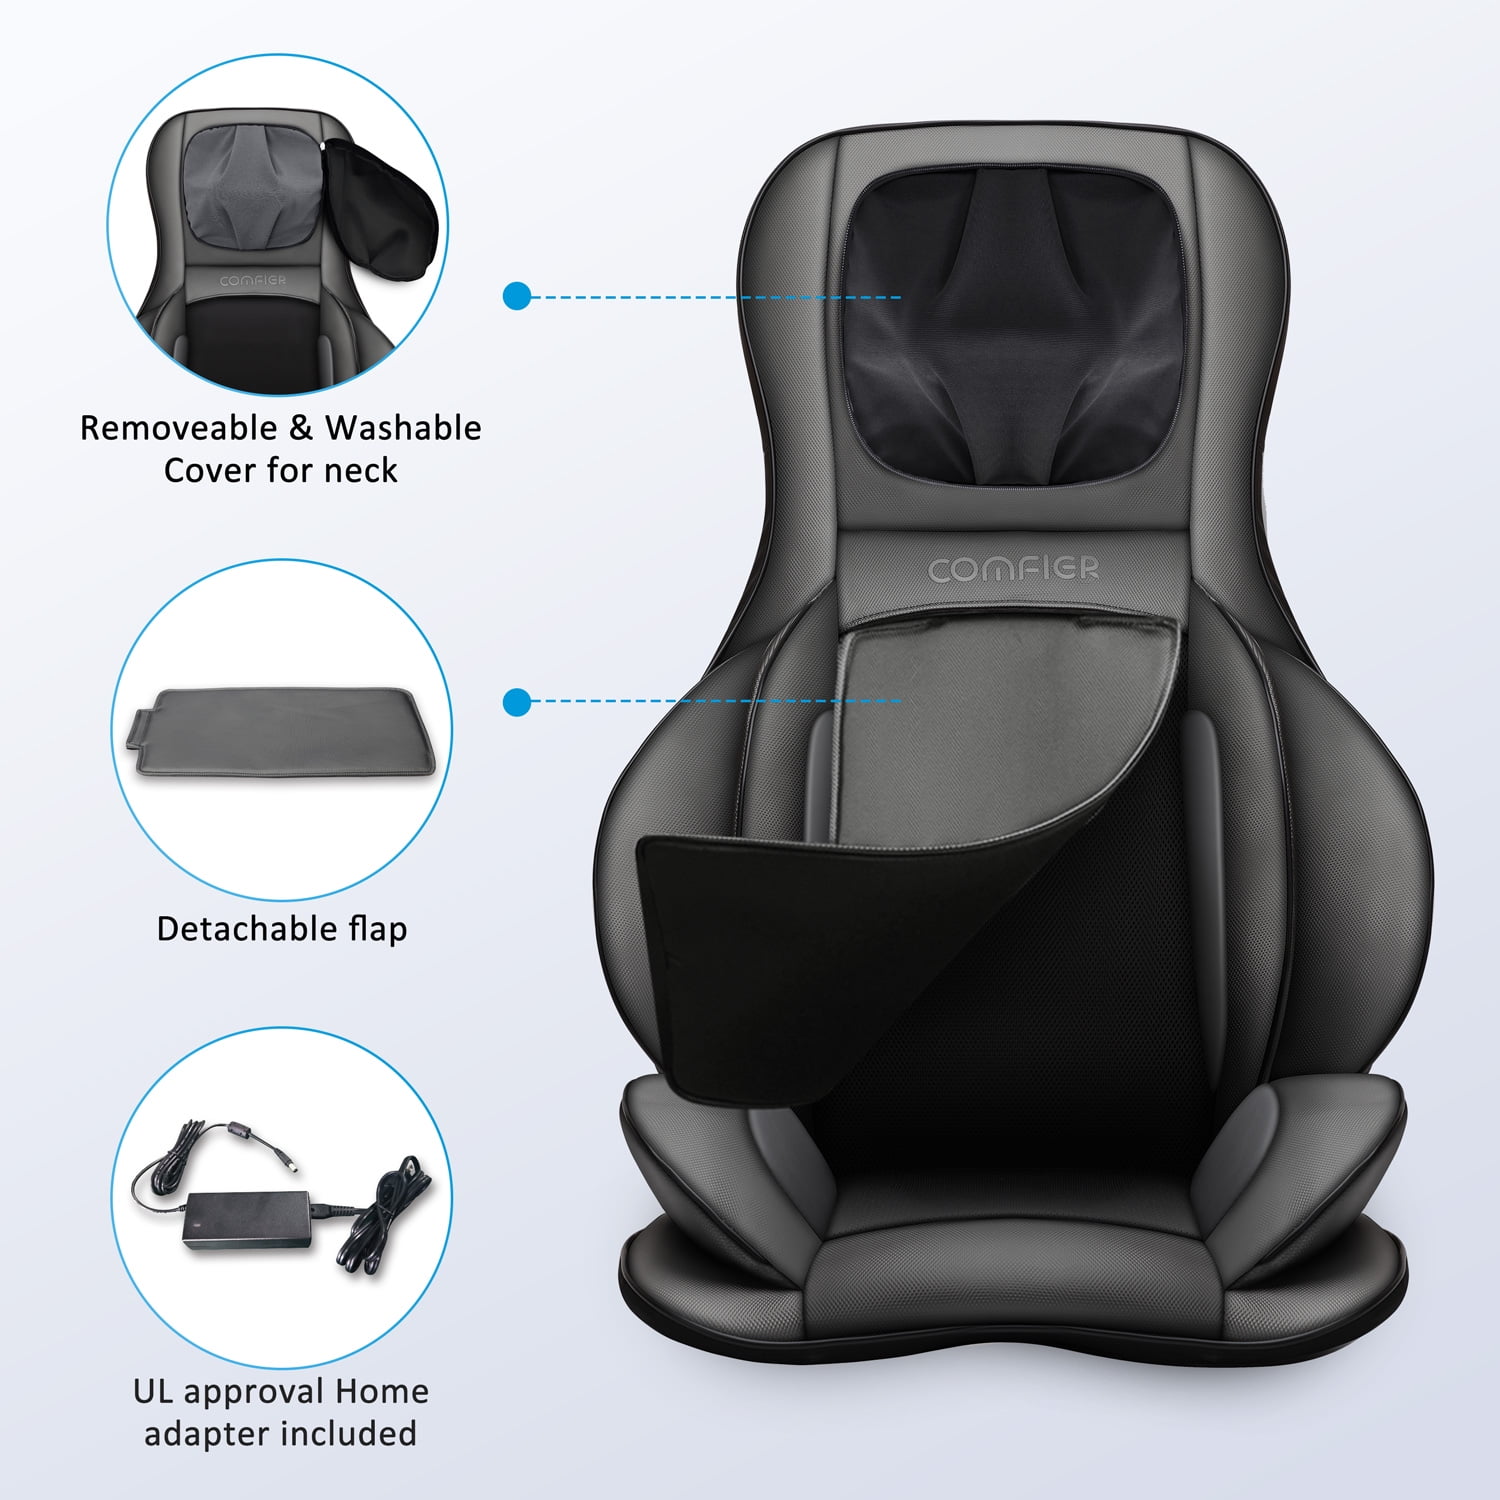 Comfier Portable Folding Massage Chair-shiatsu Neck and Back Massager with Heat Adjustable Neck/backrest Height Full Body Massager Chair Massagers for